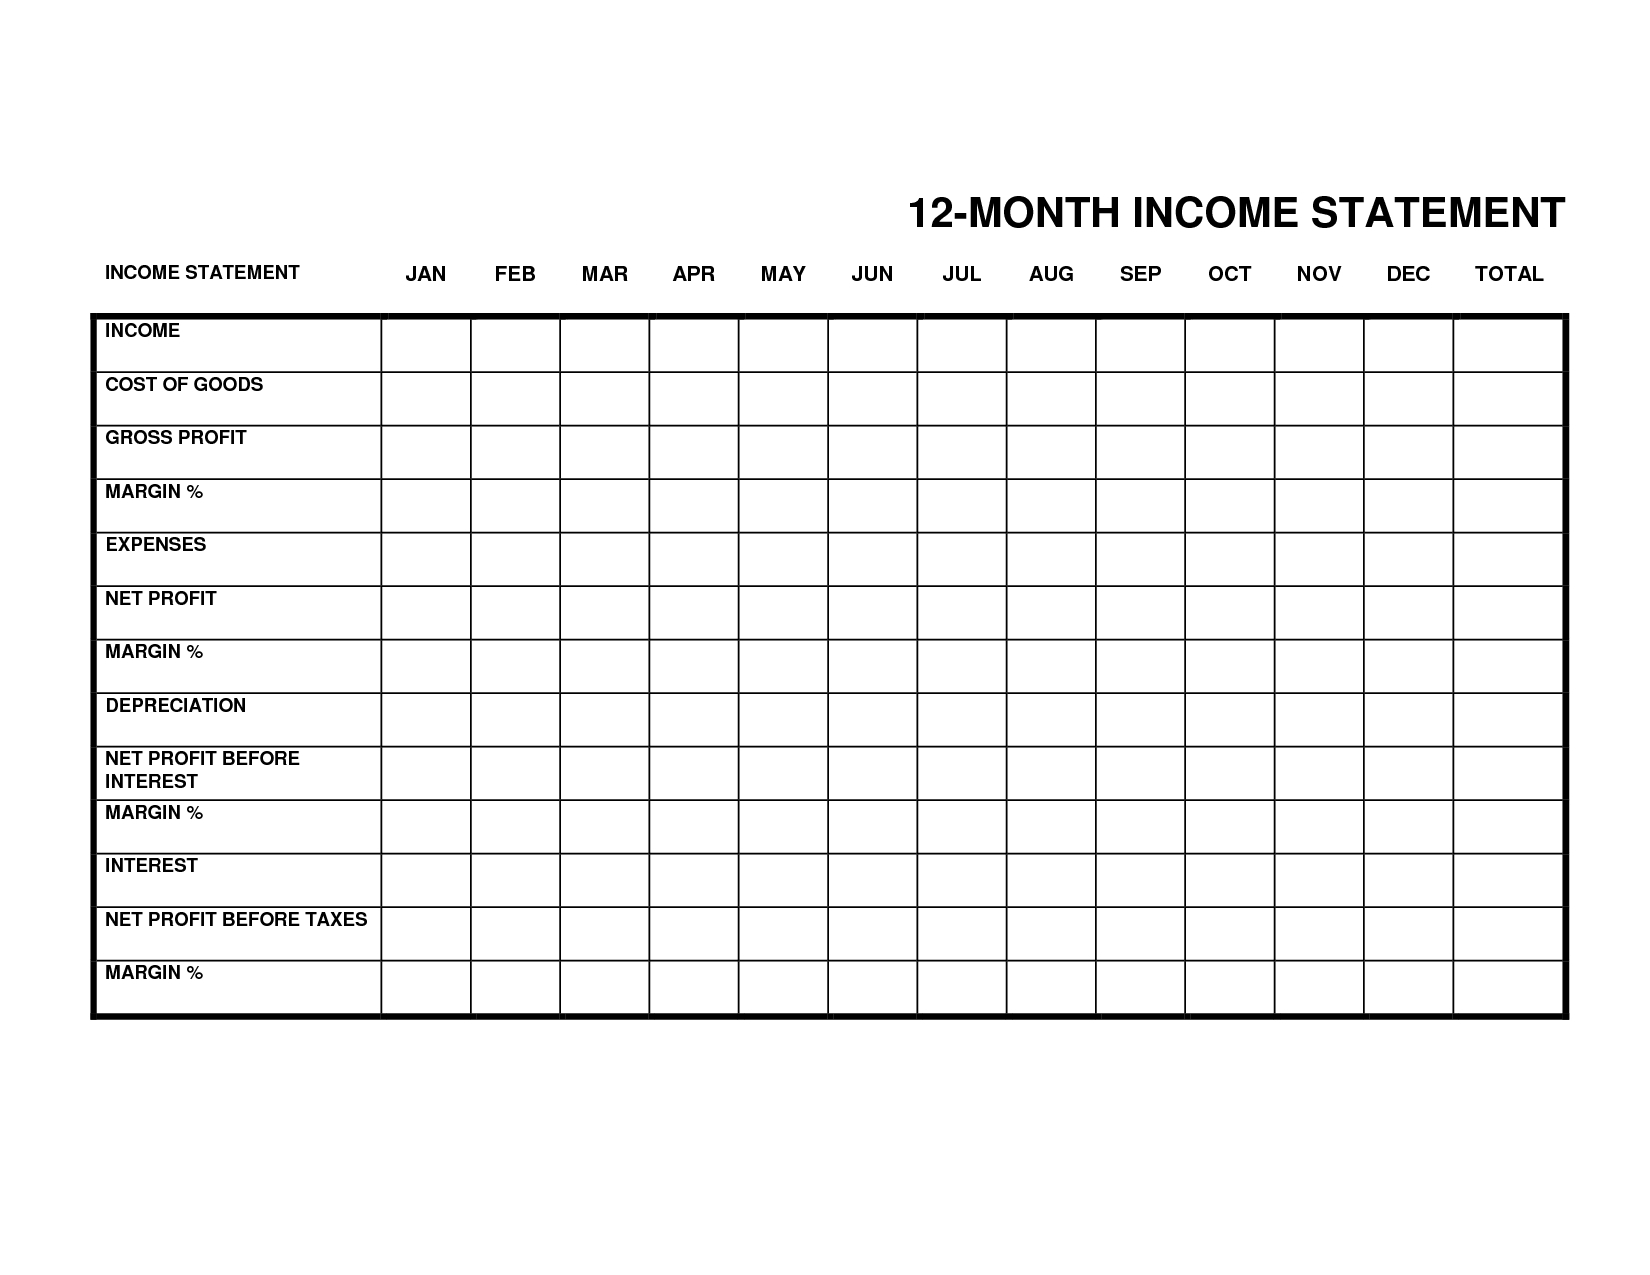 Monthly Income Statement Template Excel - Resourcesaver Intended For Income Statement Template In Excel